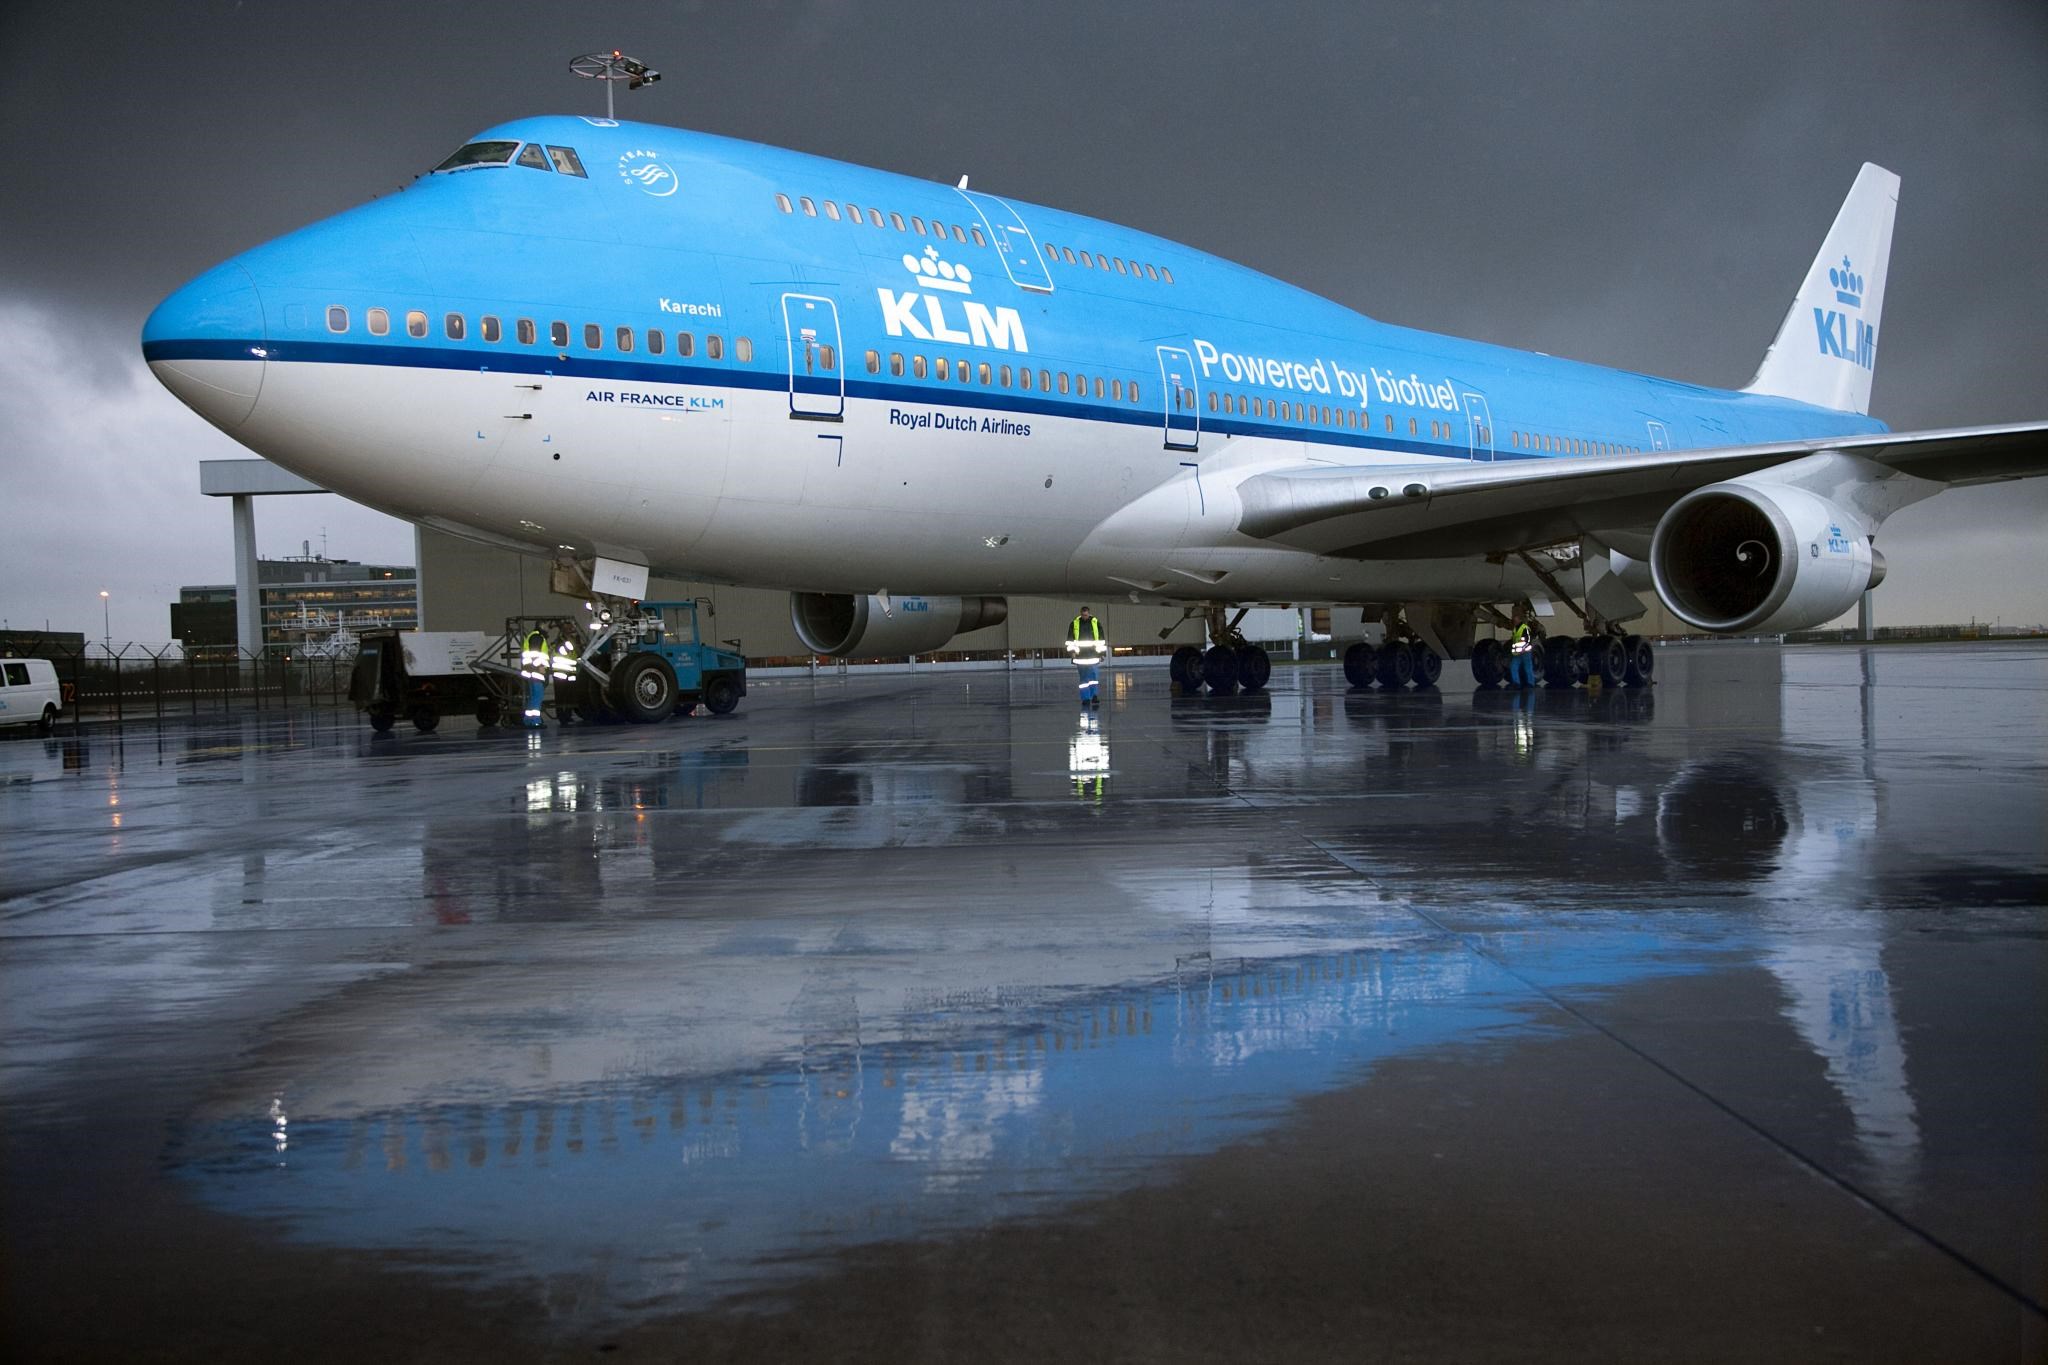 Technology: KLM ran an algorithm, and since then 63% less food has been thrown away on board